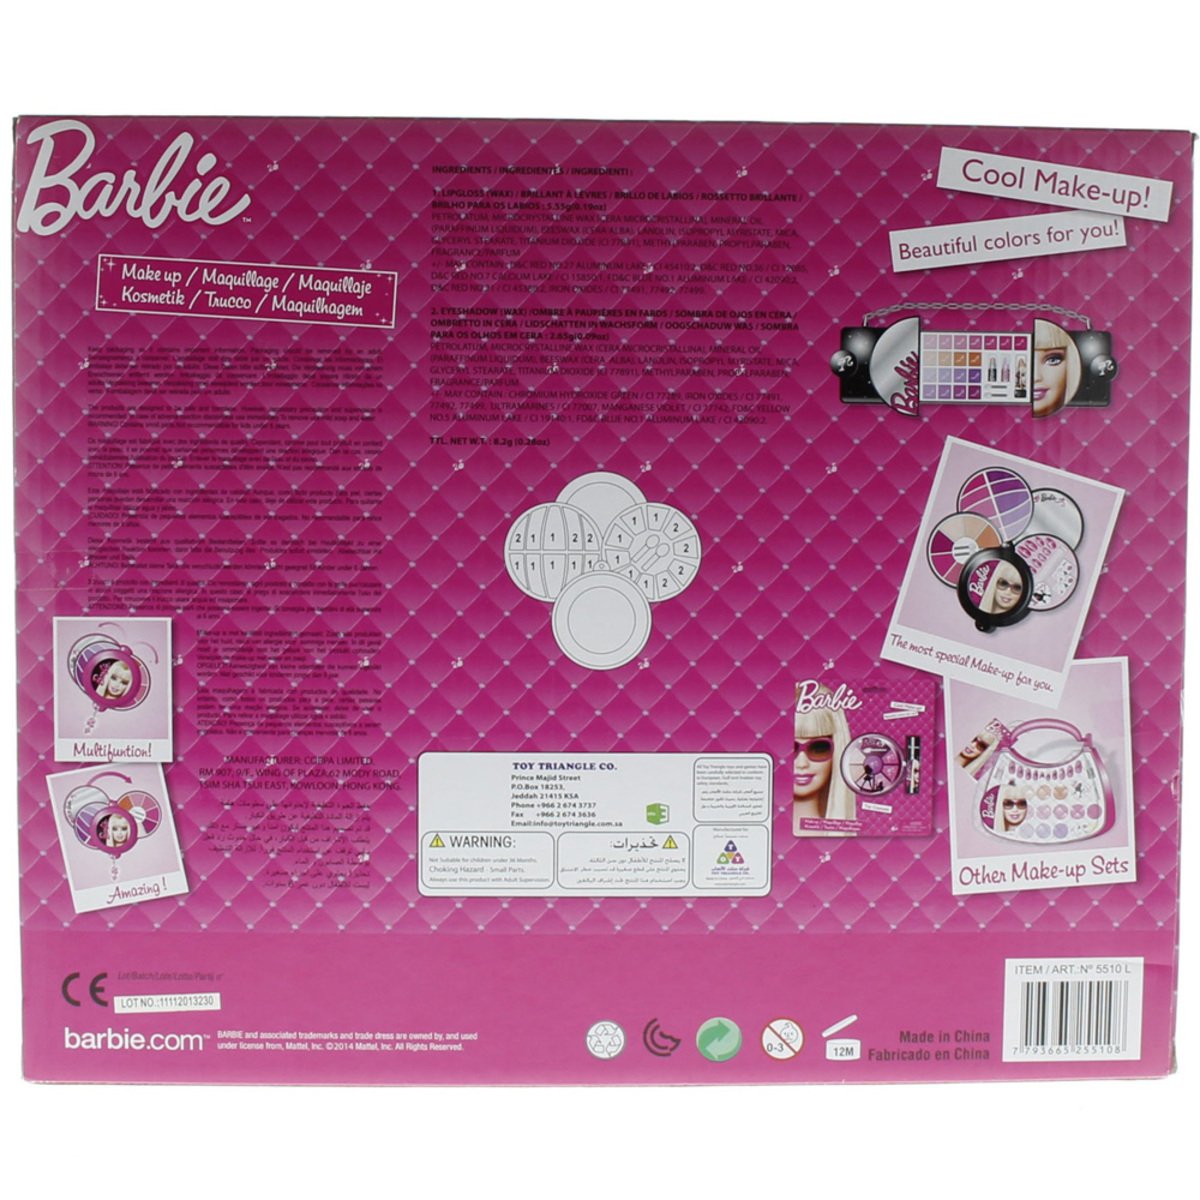 Barbie Cool Make up Toy Cosmetic